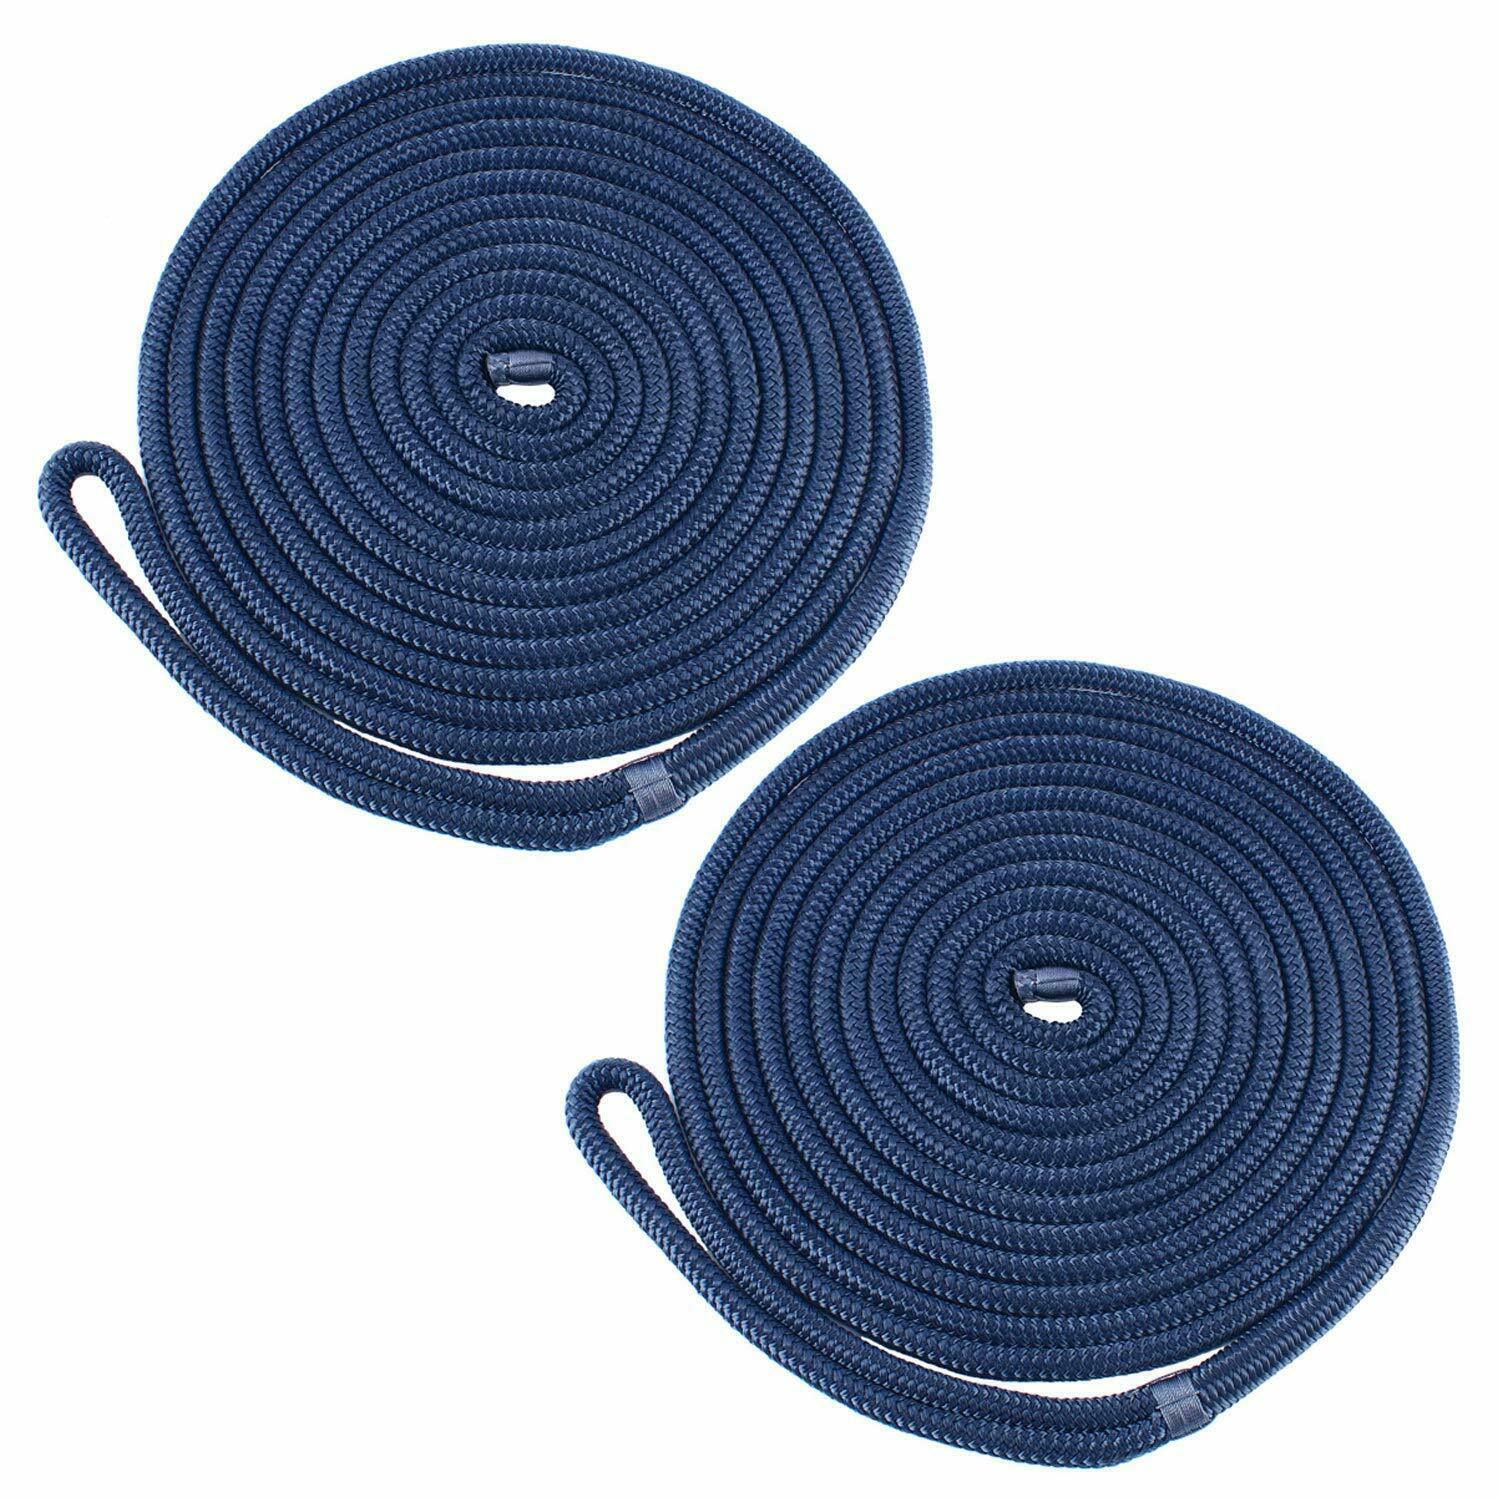 2 Pcs 1/2 Inch 25ft Dock Line Double Braid Mooring Rope Anchor Line Amarine Made